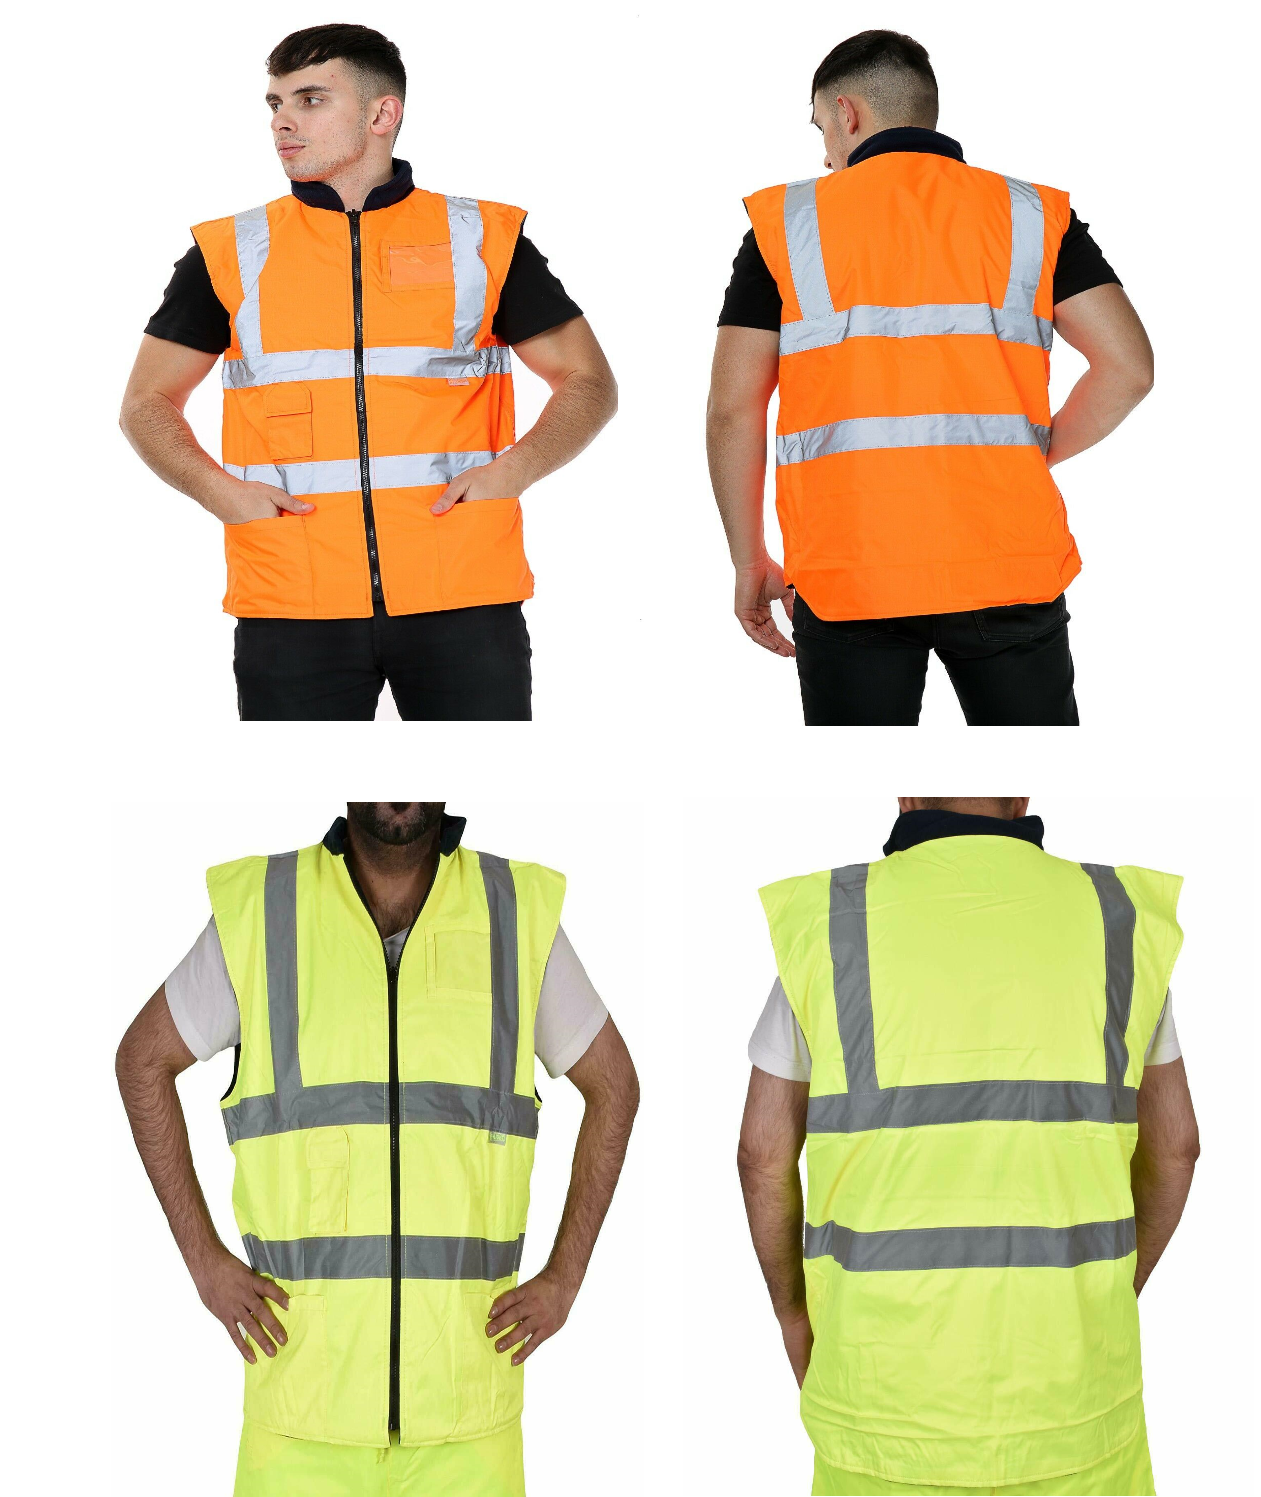 Hi Vis EN471 Class 2 Work Wear Gilets. These Have Multiple Pockets At The Front. It Is A Zip Fastening. The Gilets Have The CE Testing Mark Demonstrating Compliance With 89/686/EEC Personal Protective Equipment Annex 11 Heath And Safety Requirements. They Have Also Been manufactured Under Rigorous ISO9001 Quality Process Standards. These Are Available In Yellow And Orange In Sizes Small To 5 X-Large.